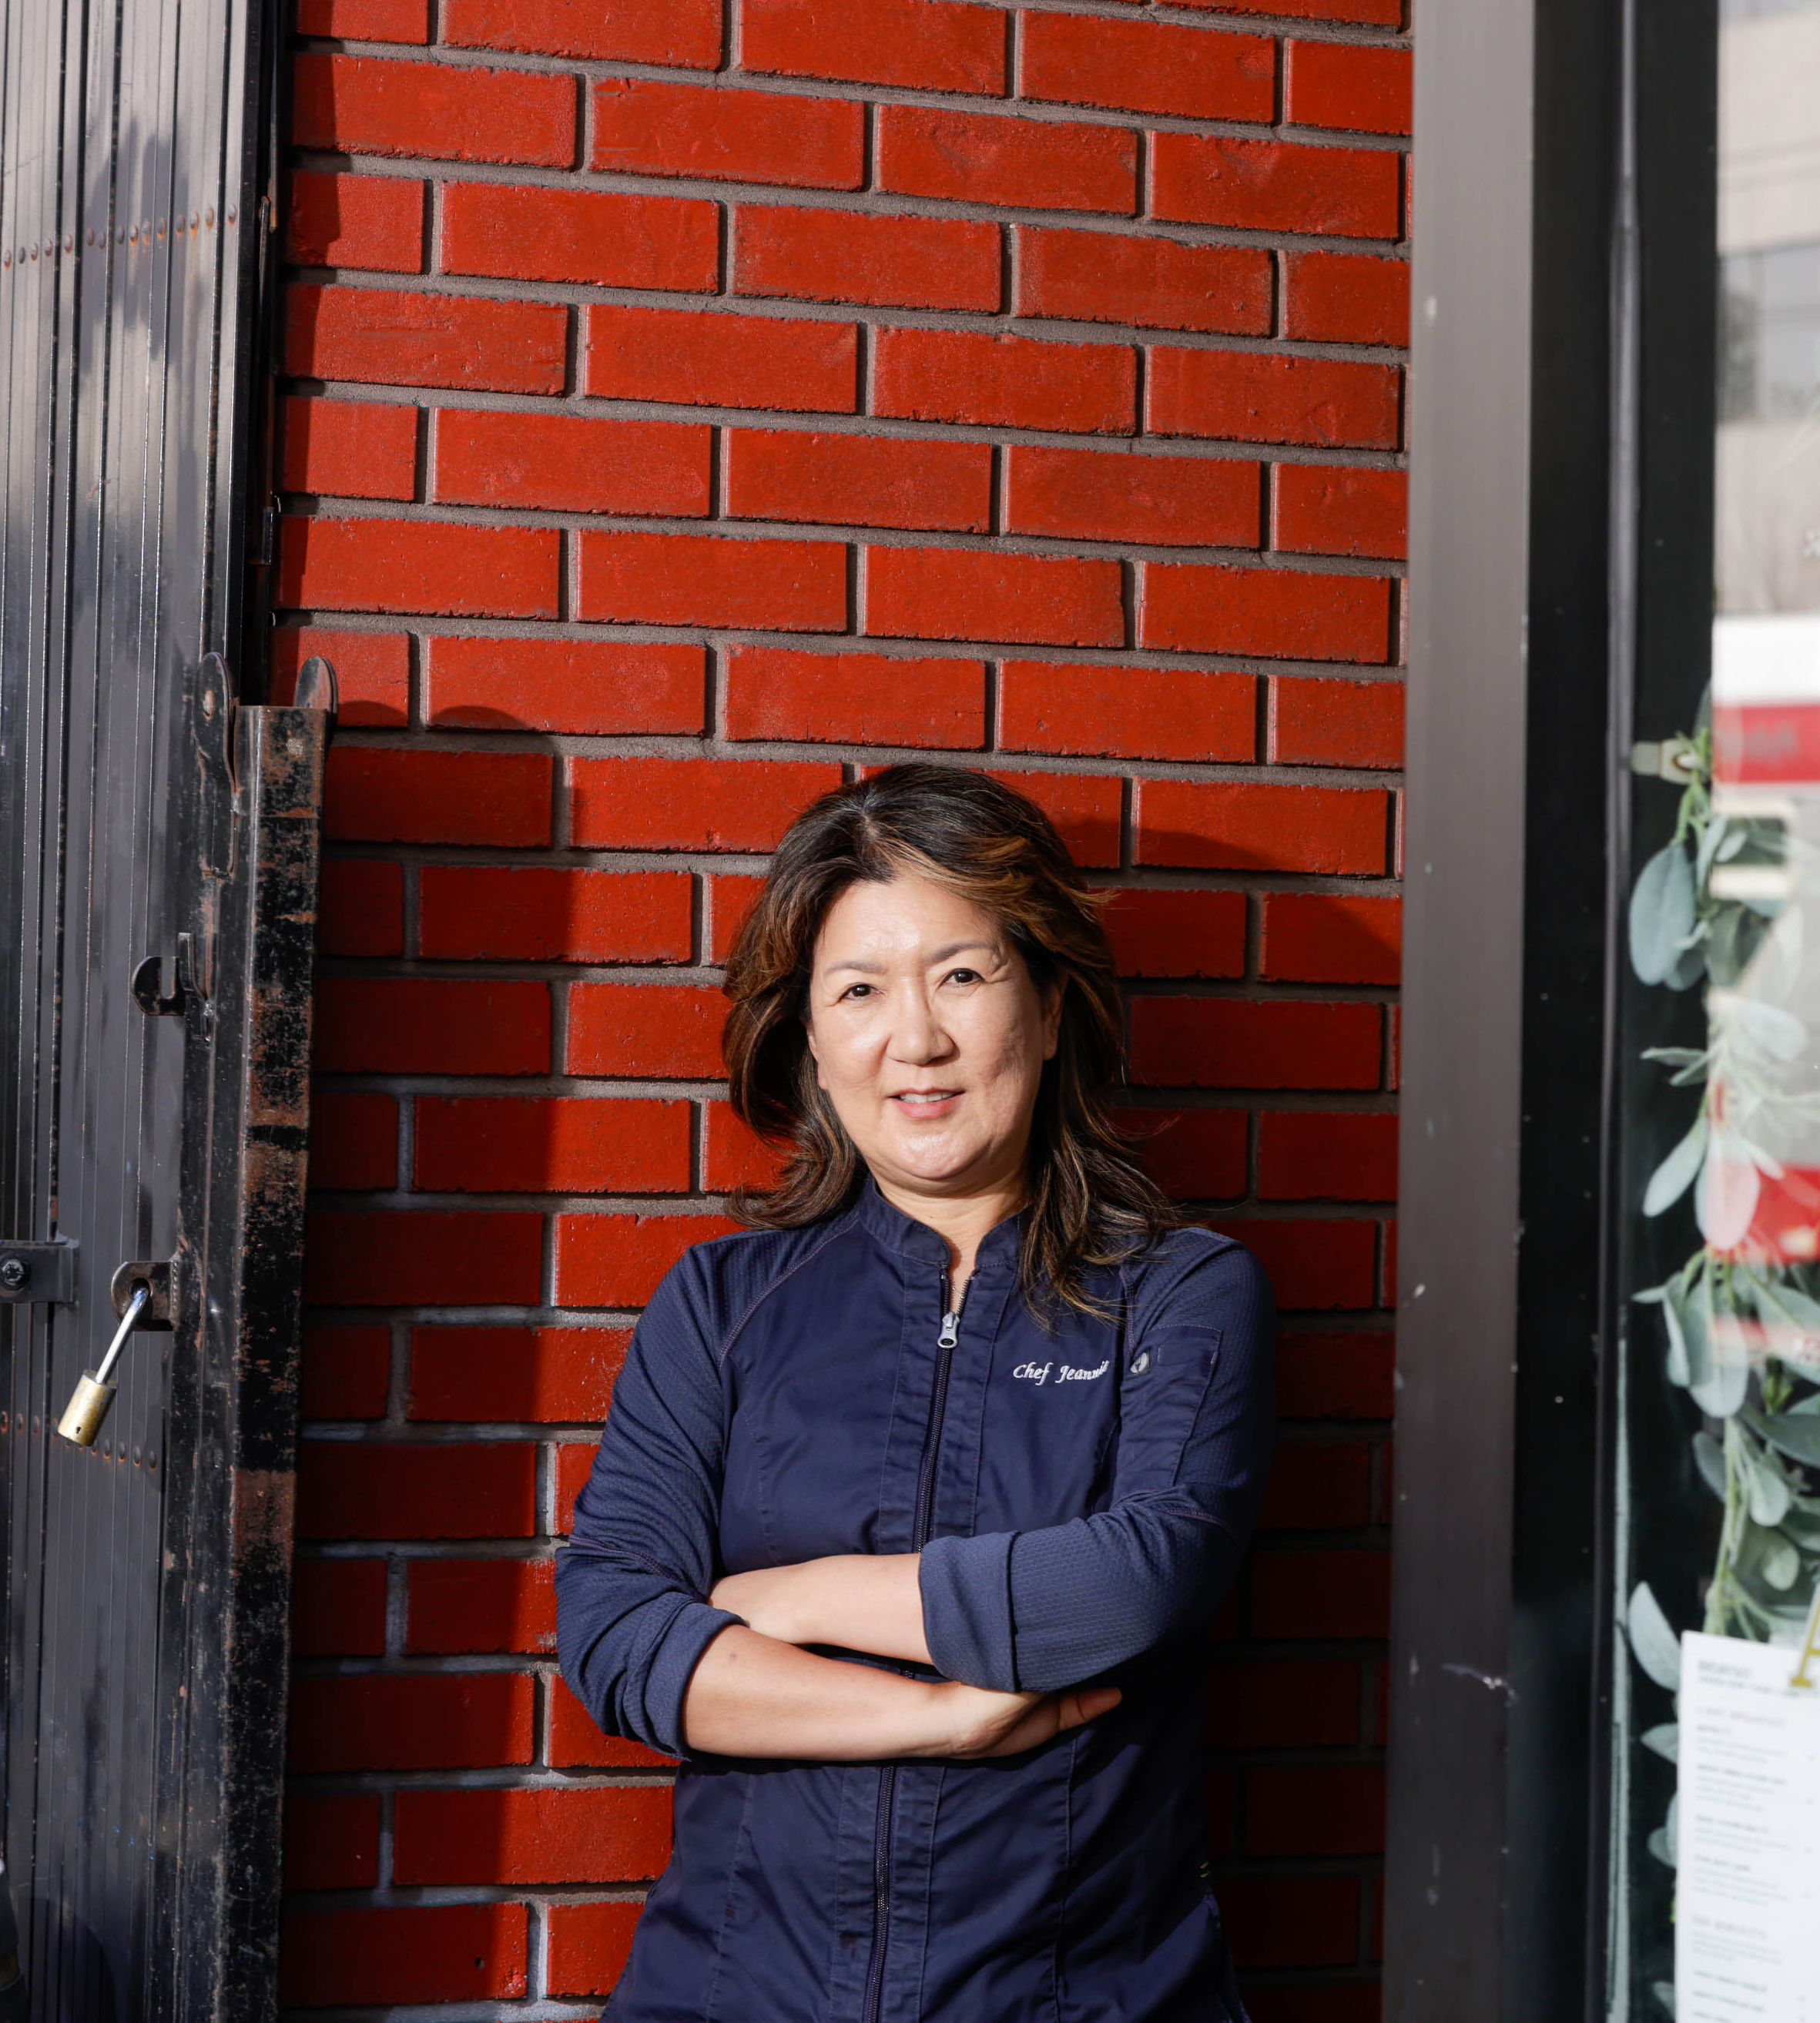 A woman in a chef's jacket stands with arms crossed by a brick wall, near a door.